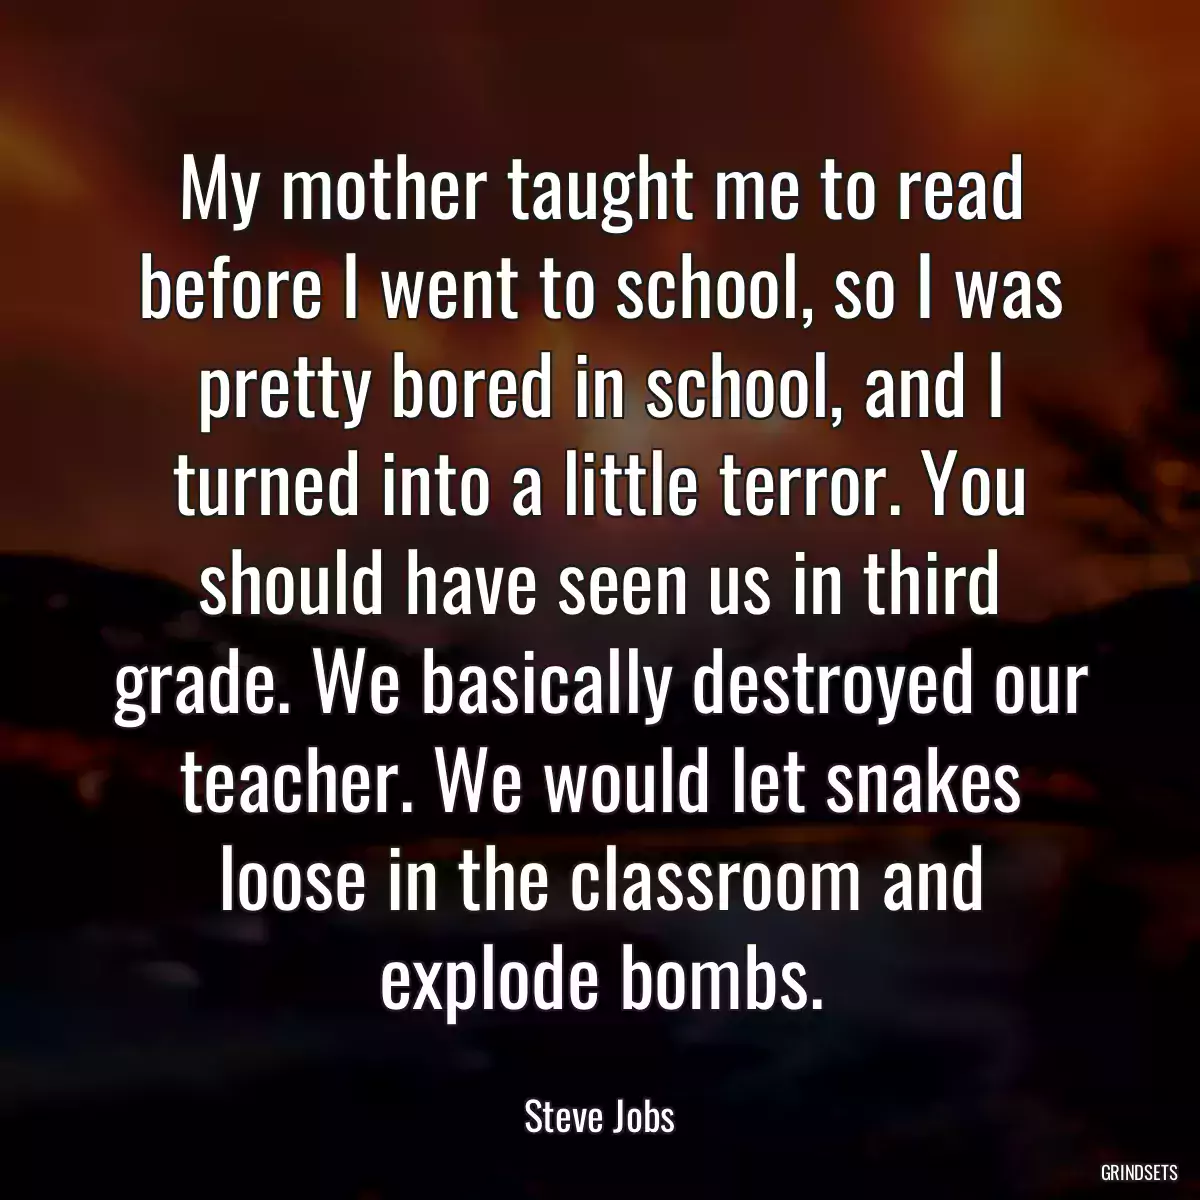 My mother taught me to read before I went to school, so I was pretty bored in school, and I turned into a little terror. You should have seen us in third grade. We basically destroyed our teacher. We would let snakes loose in the classroom and explode bombs.